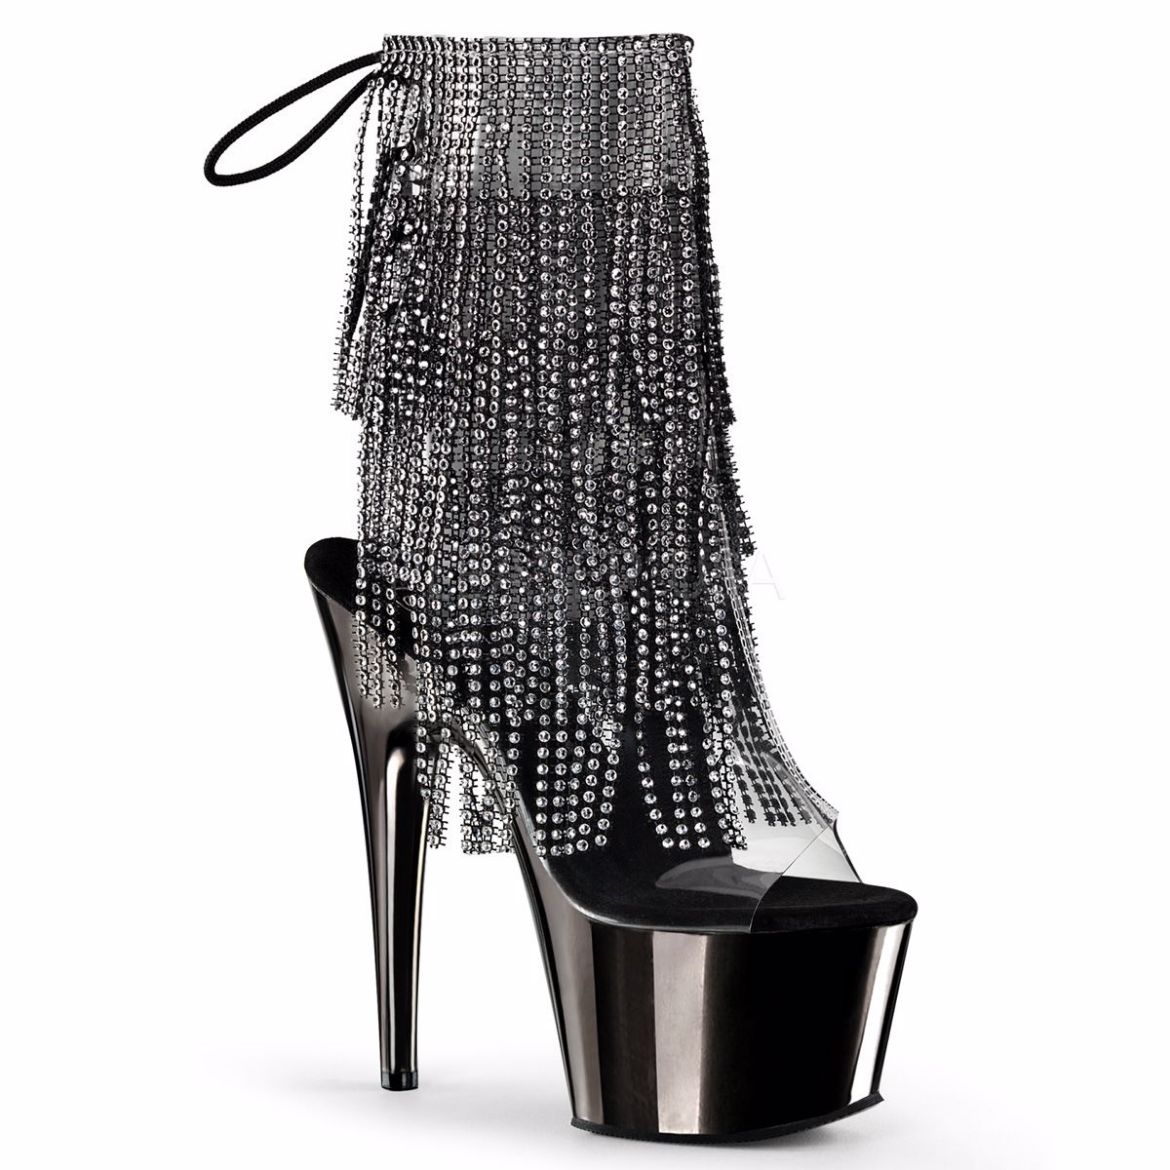 Product image of Pleaser Adore-1017Rsf Clear-Black/Dark Pewter Chrome, 7 inch (17.8 cm) Heel, 2 3/4 inch (7 cm) Platform Ankle Boot